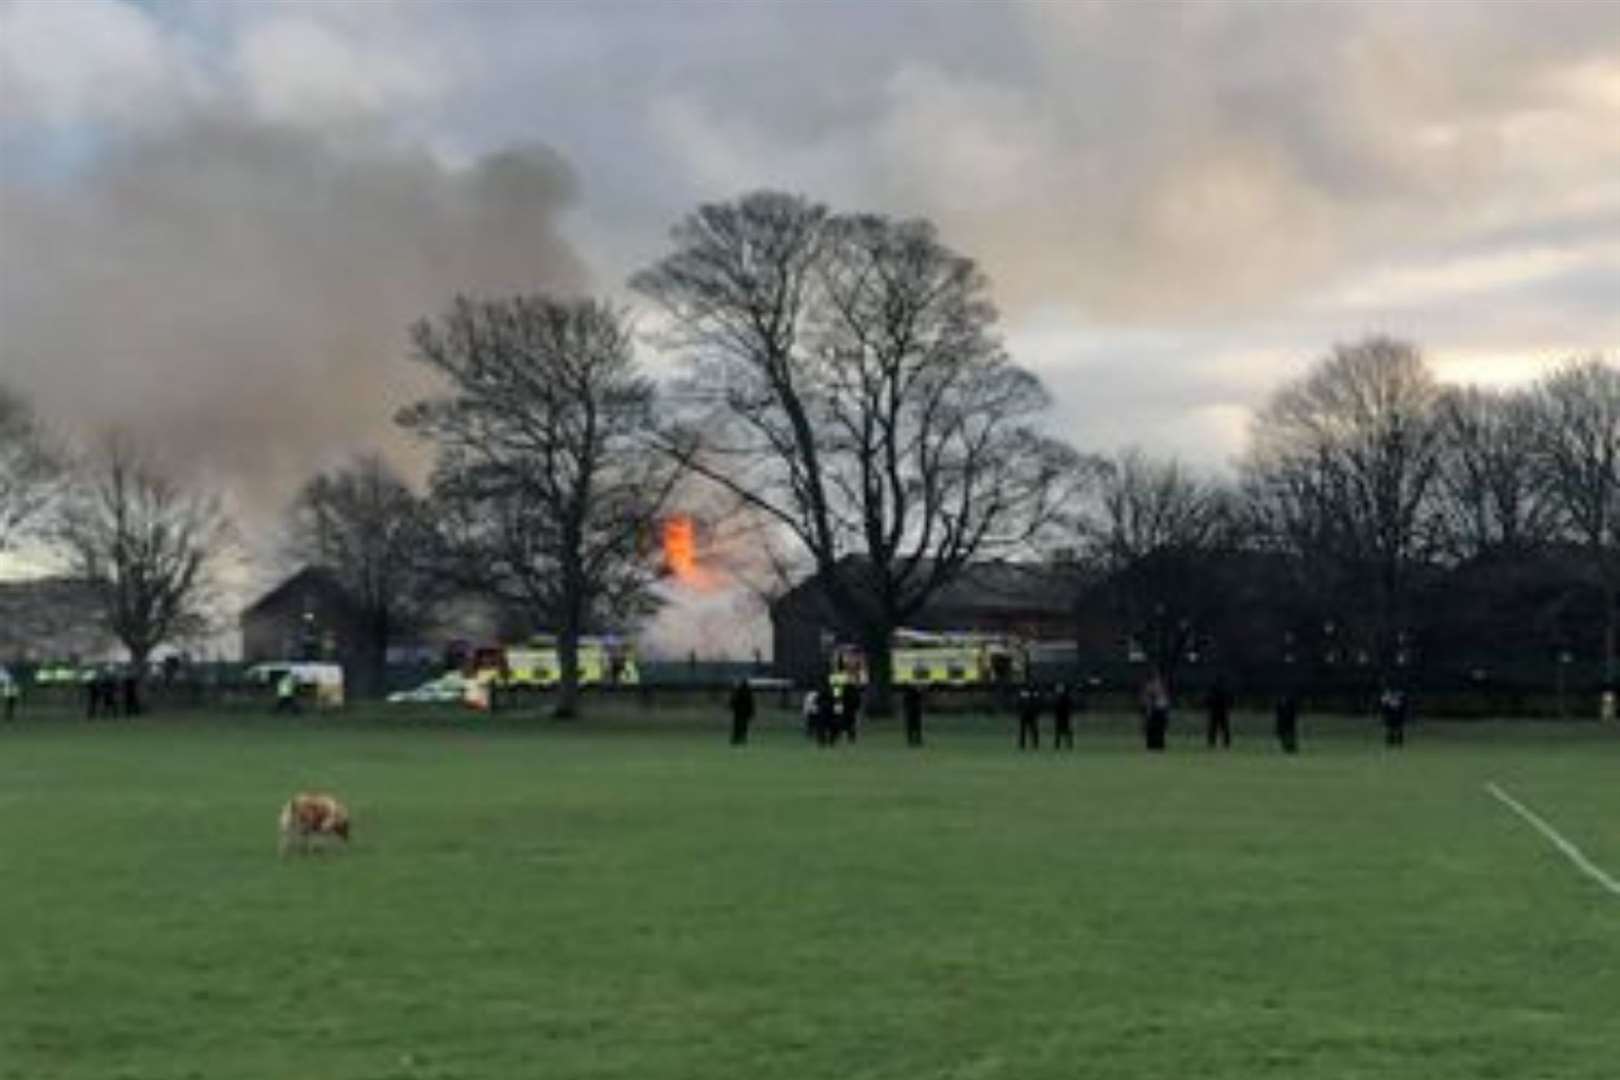 A fire was started at the barracks, believed to be a response to the lack of Covid-19 safety